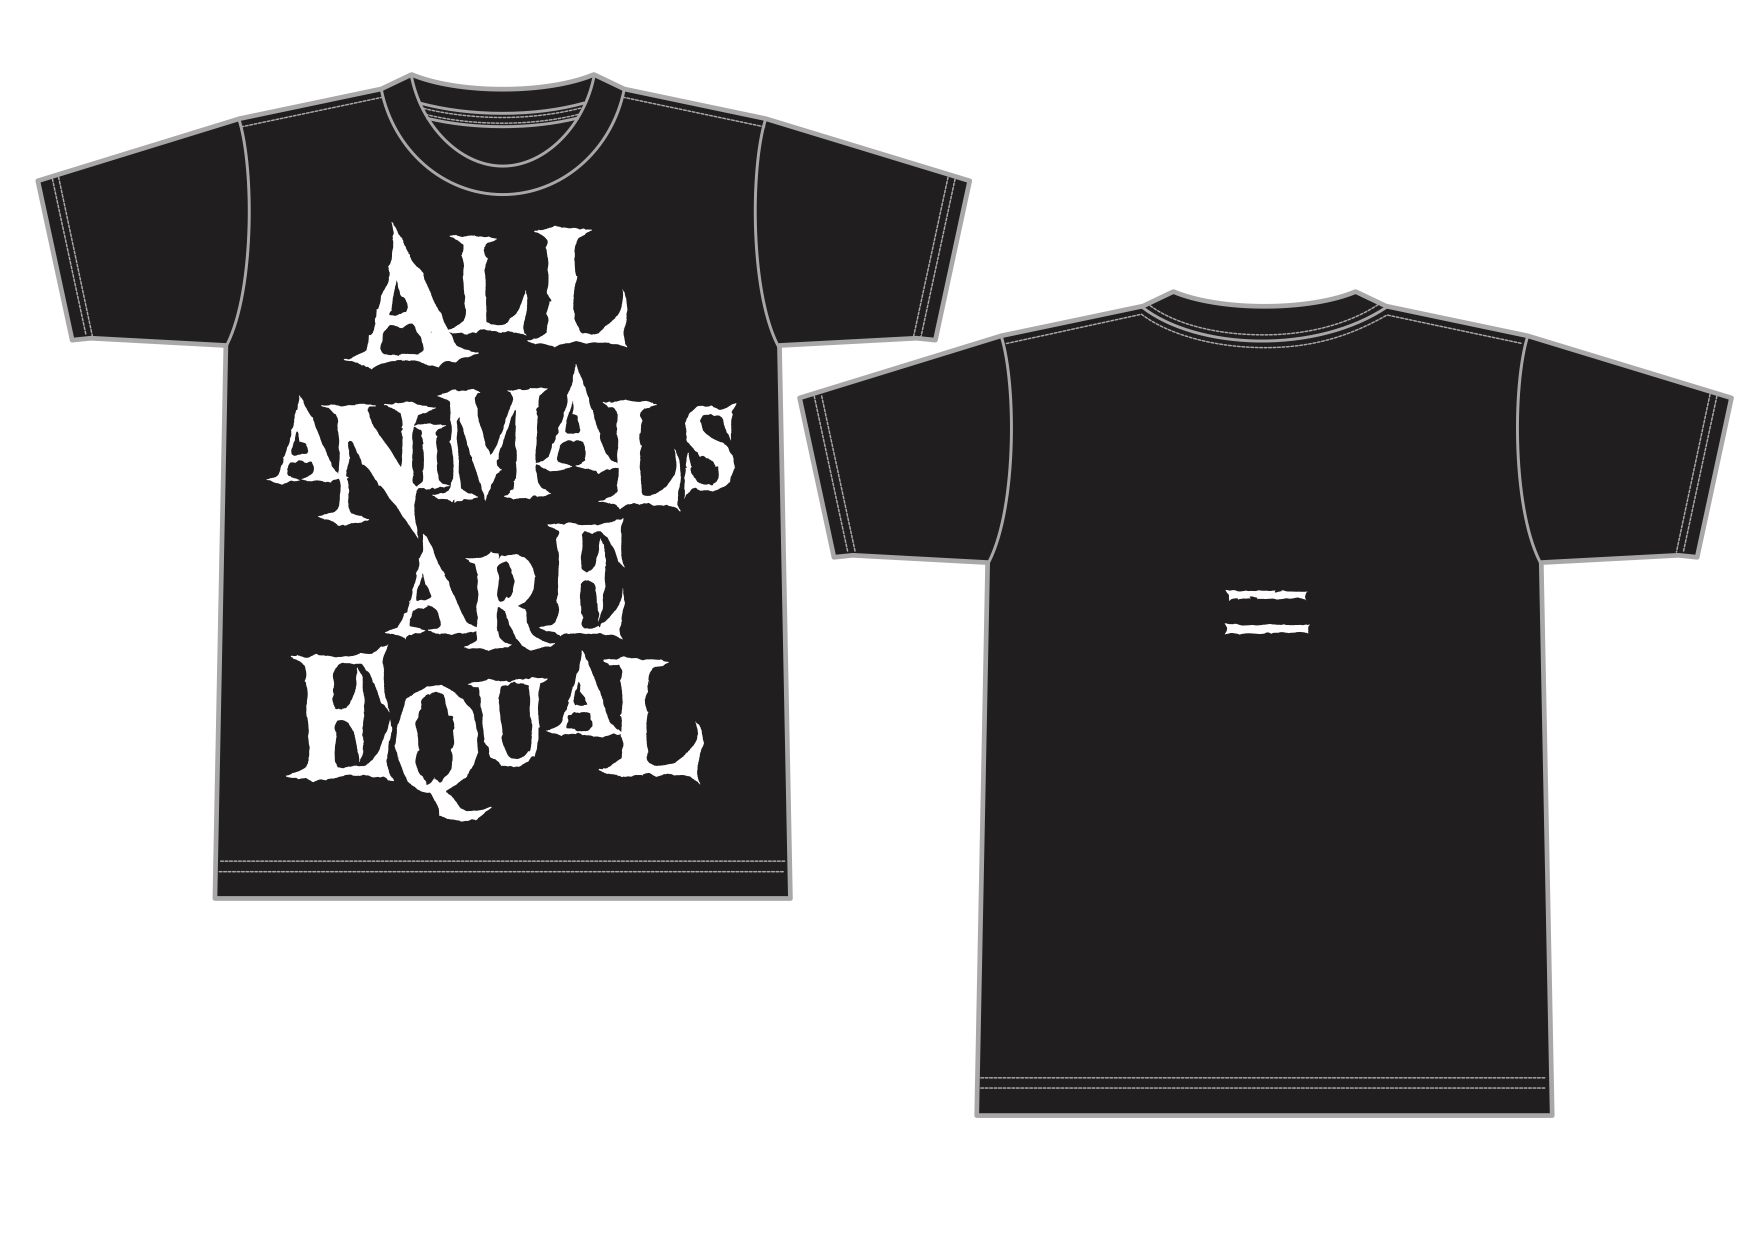 AA= OIO Special _ALL ANIMALS ARE EQUAL_ T-shirtデザイン画像